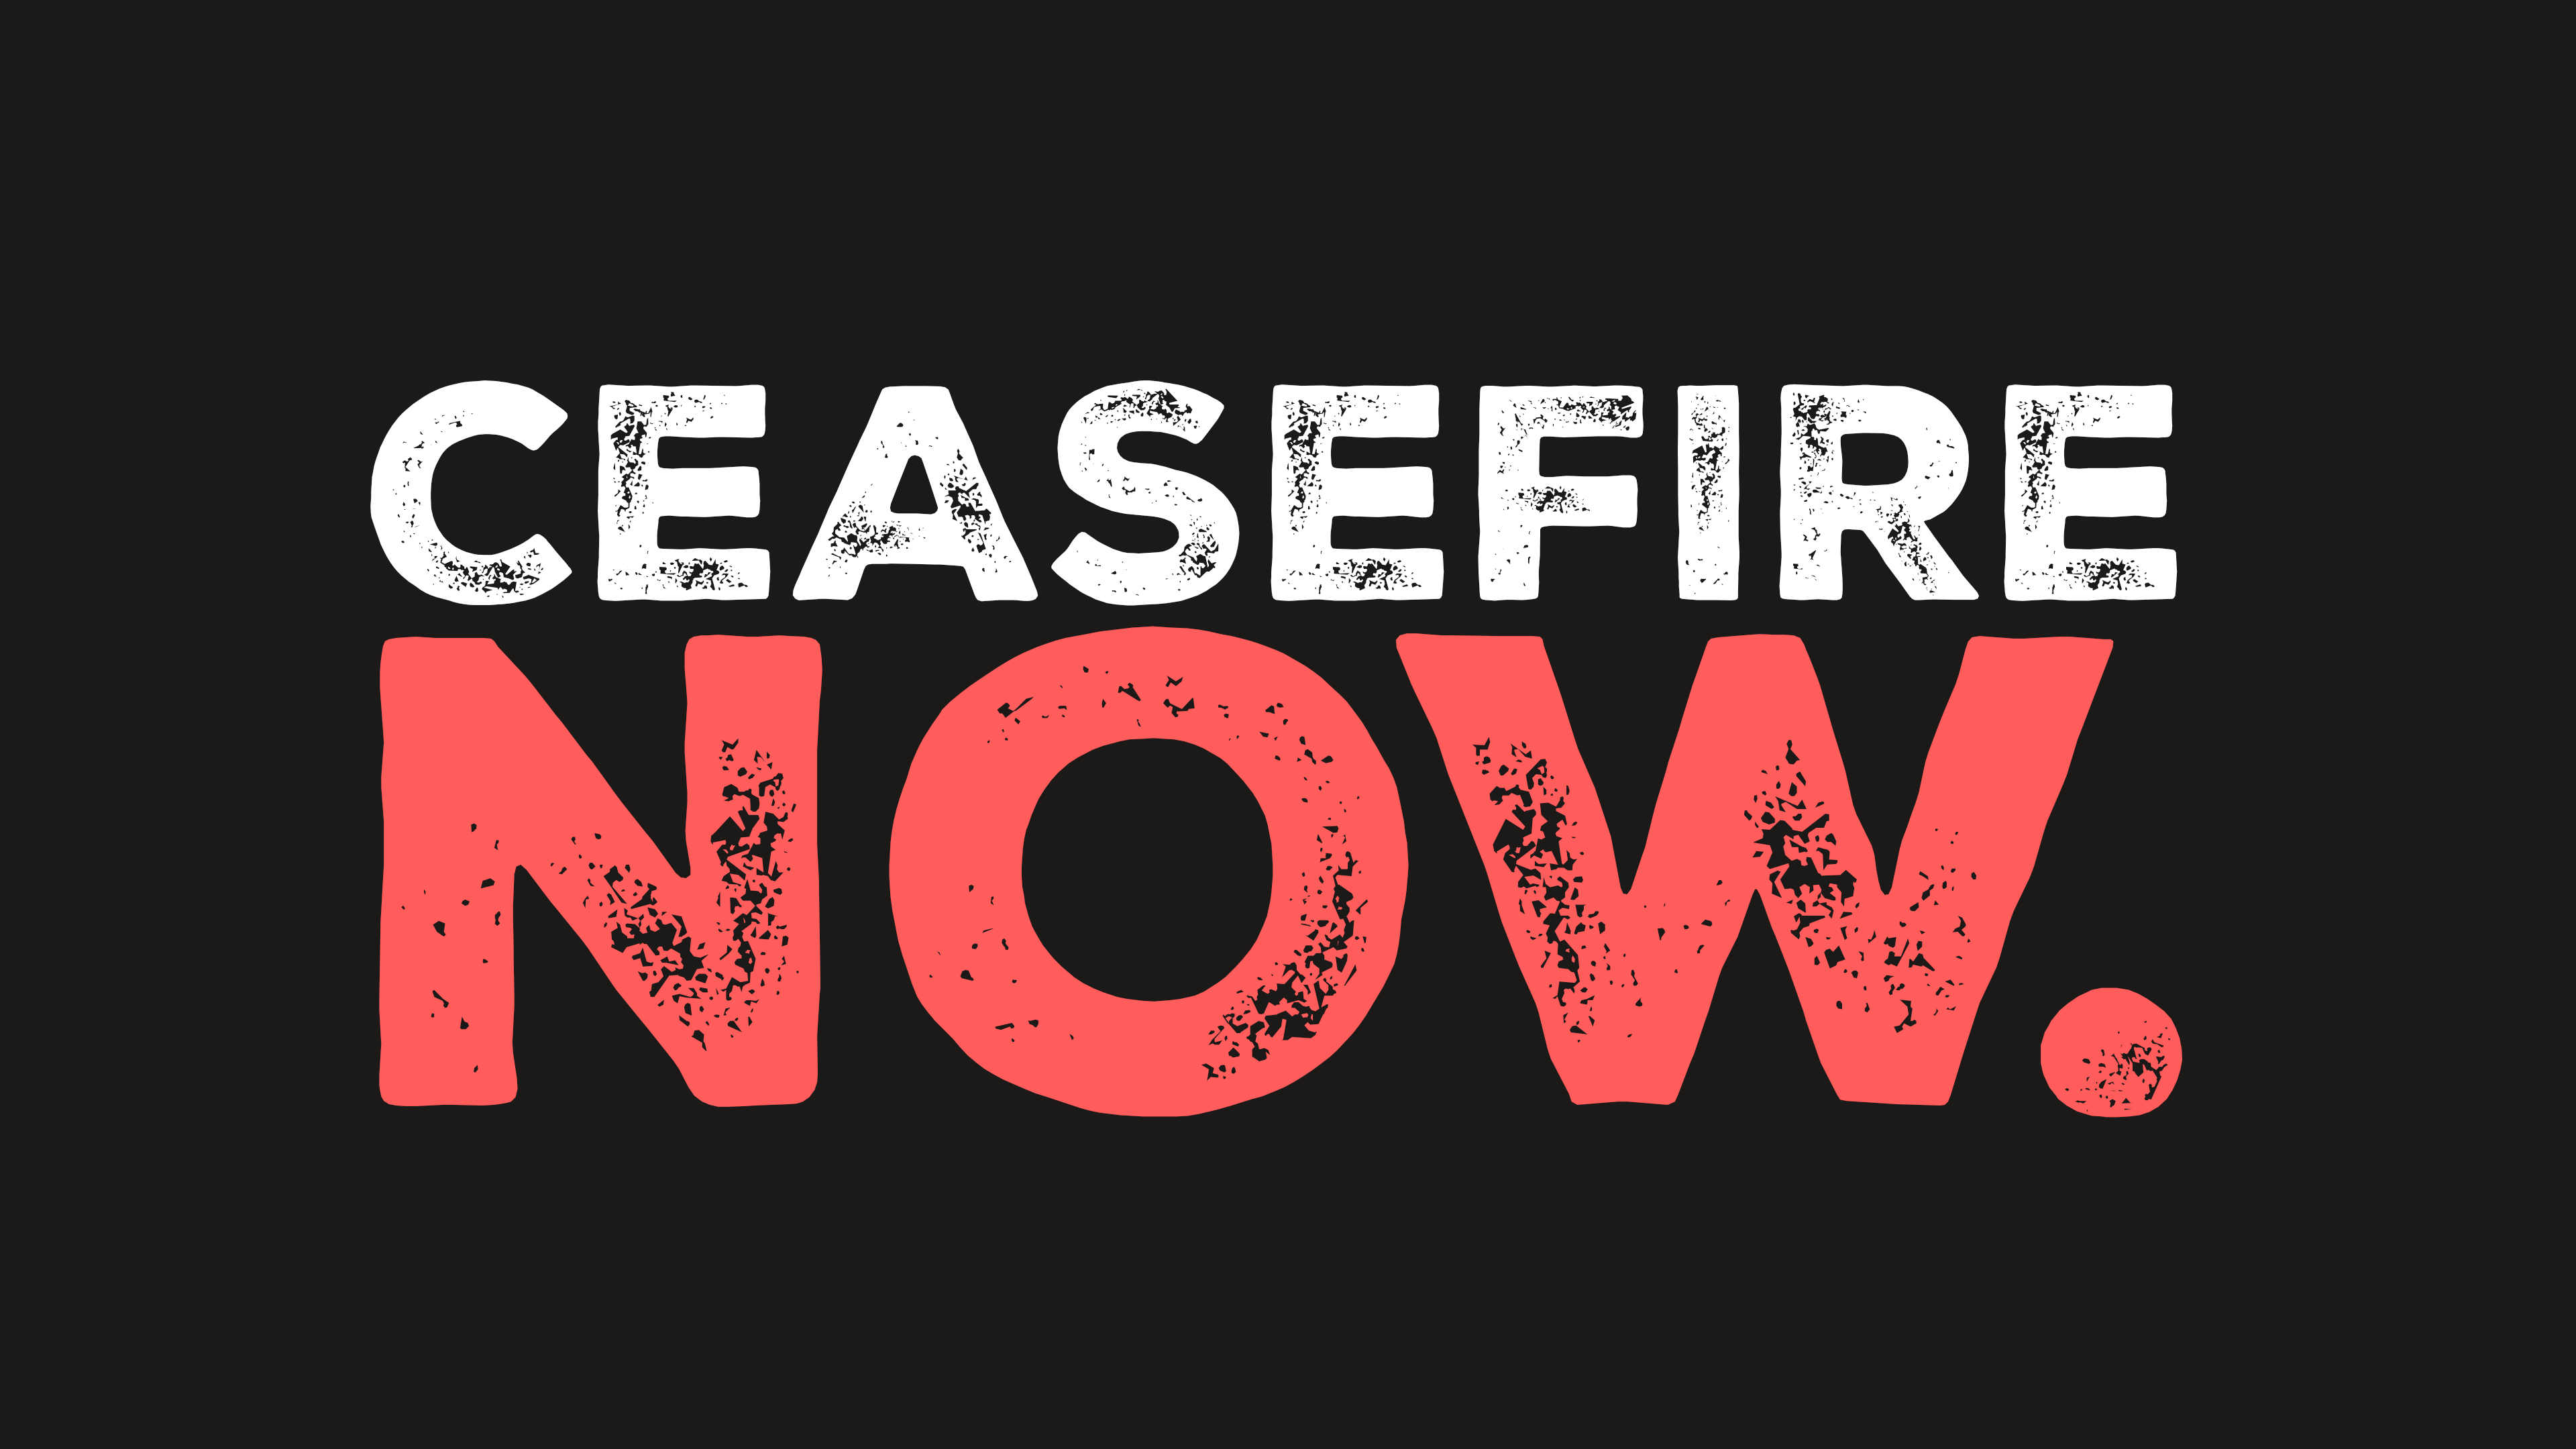 Amplify the call for a #CeasefireNOW